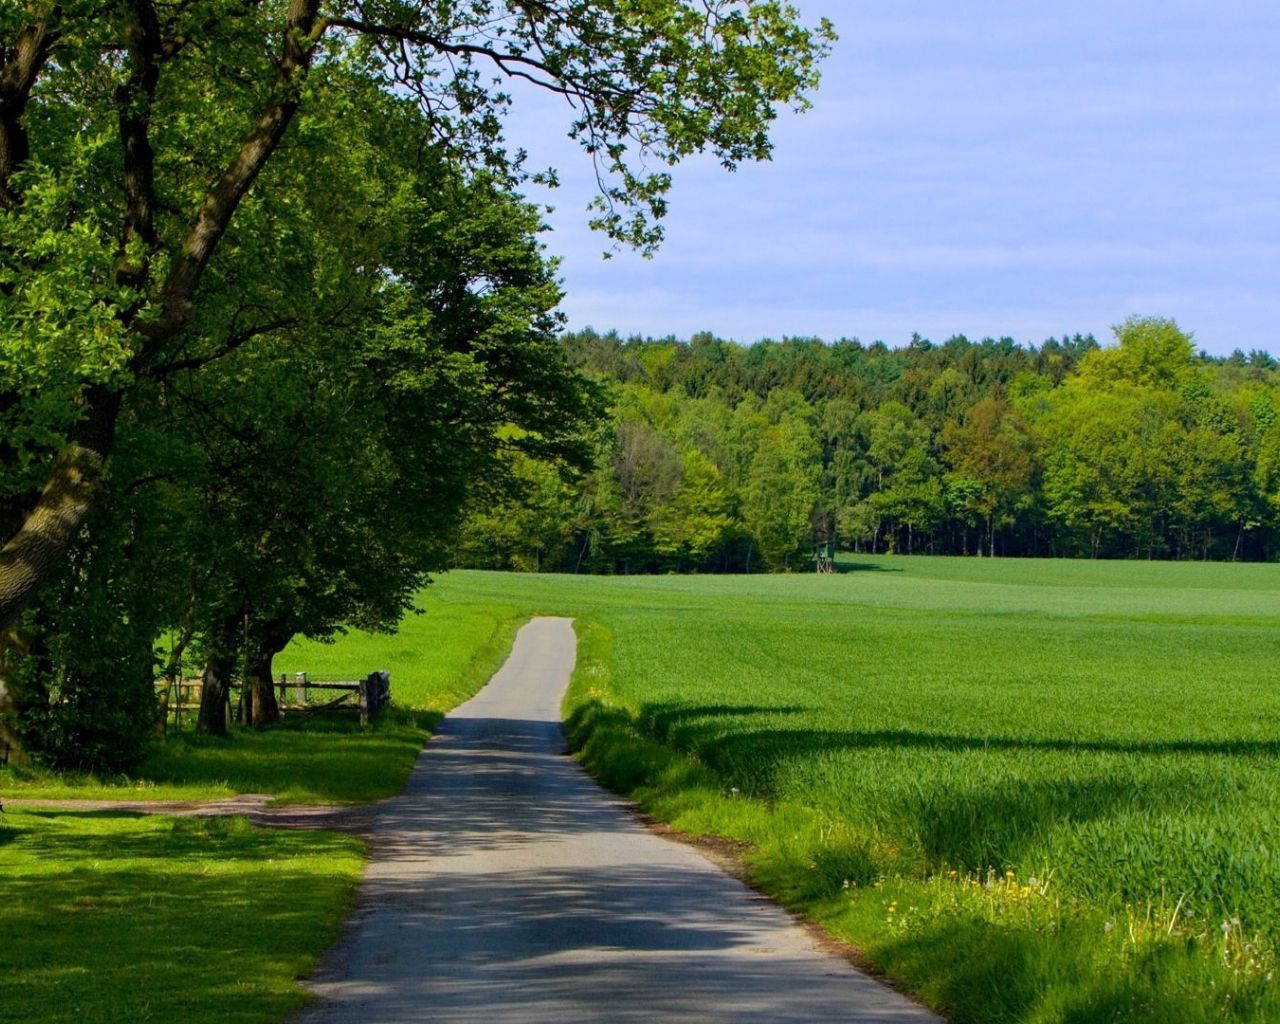 1280x1024 Free Download Countryside Road On A Summer Day Desktop Wallpaper 29485 1920x1080 For Your Desktop Mobile Tablet Explore A Summer Day Wallpaper A Summer Day Wallpaper Wallpaper A